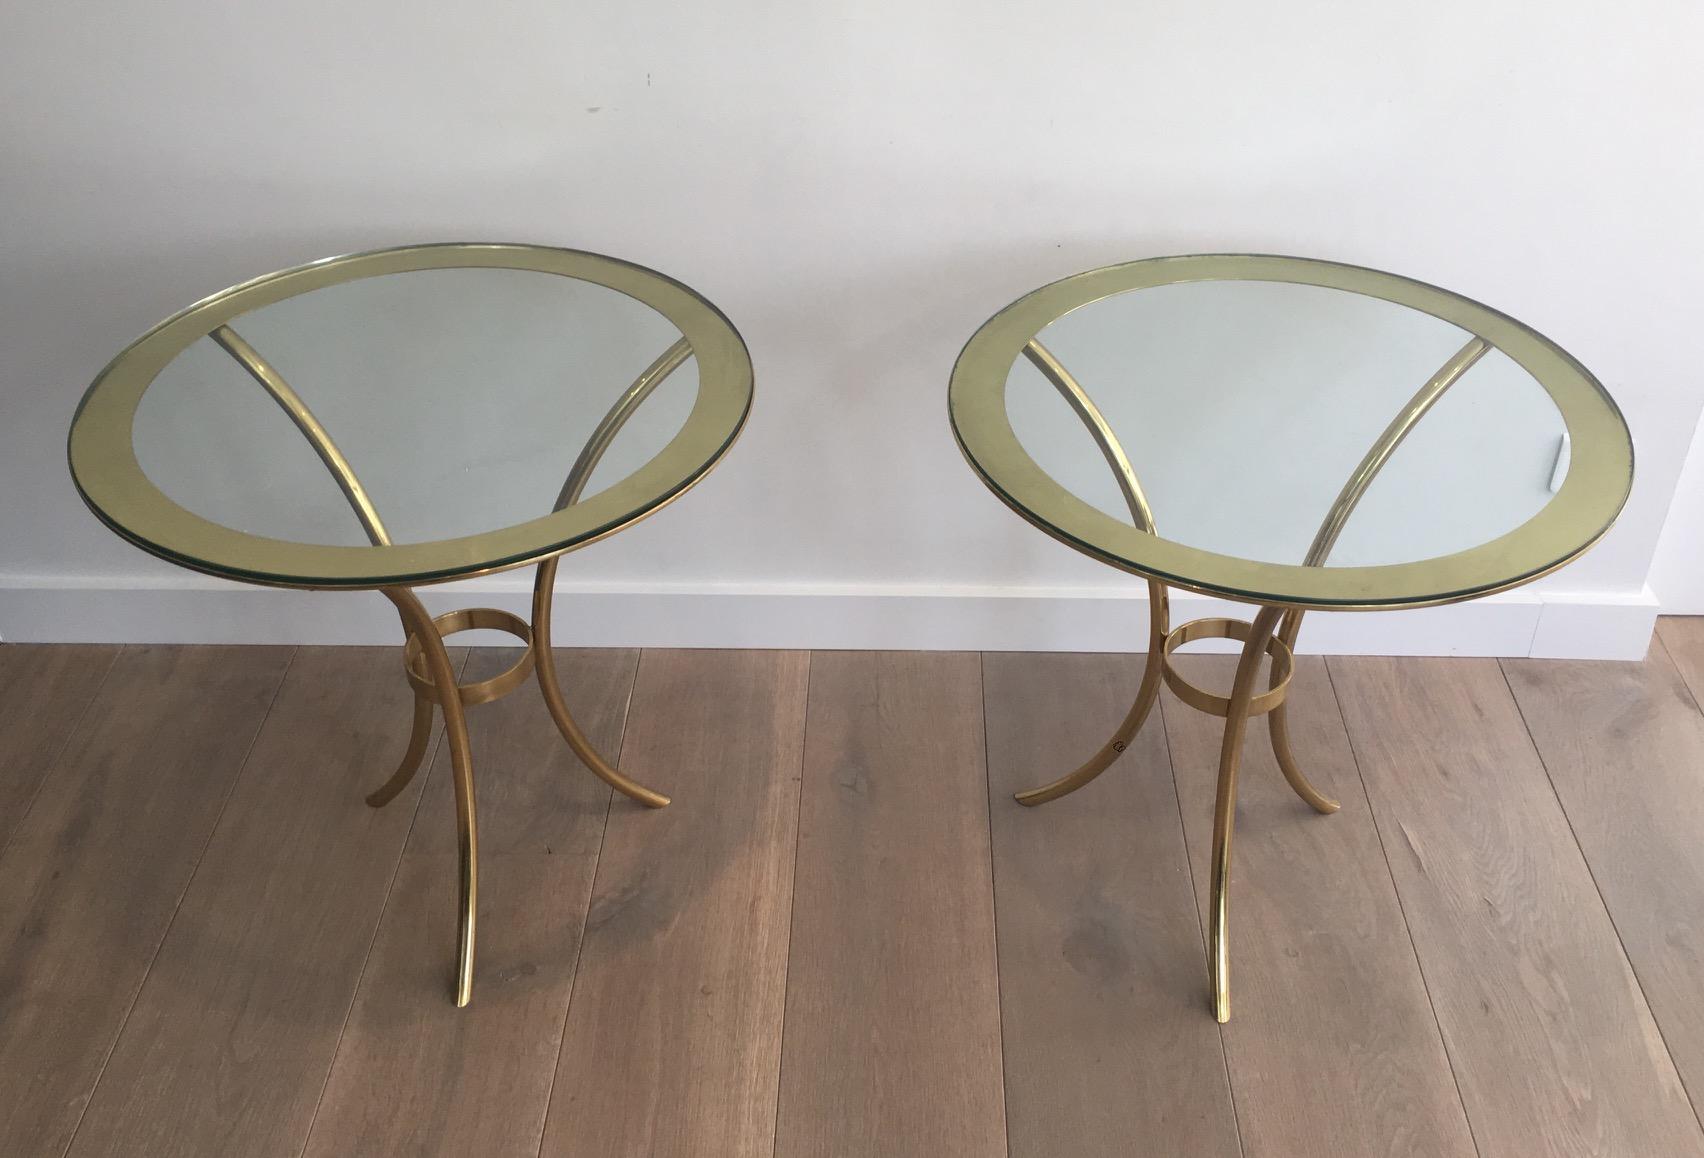 This pair of round gold gilt brass side tables have a glass top fixed on the top circle. They are very elegant. This is an Italian work, circa 1970.